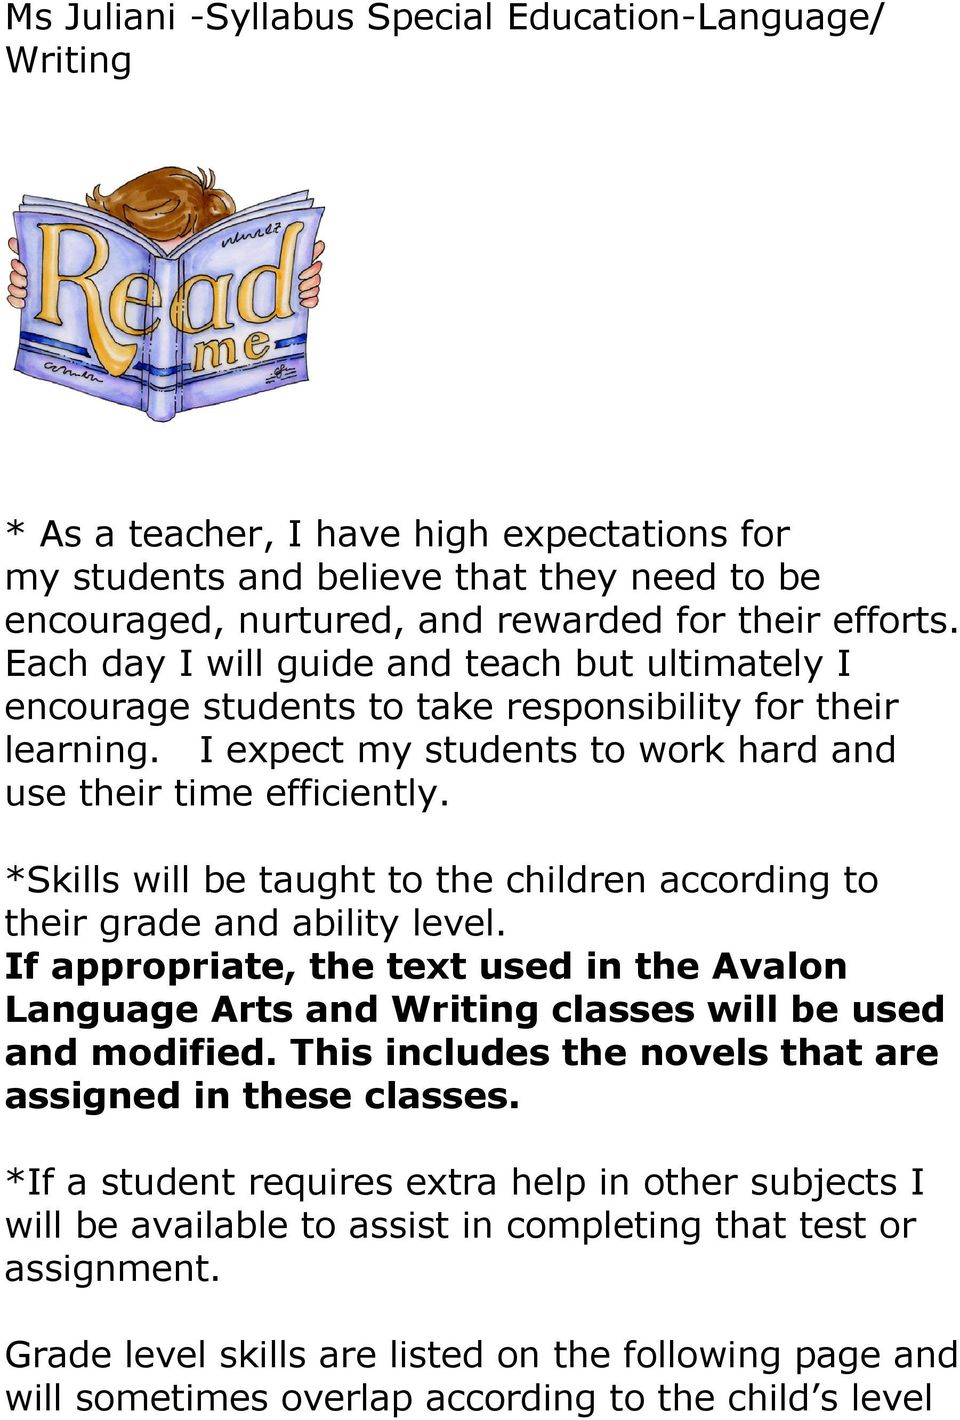 *Skills will be taught to the children according to their grade and ability level. If appropriate, the text used in the Avalon Language Arts and Writing classes will be used and modified.